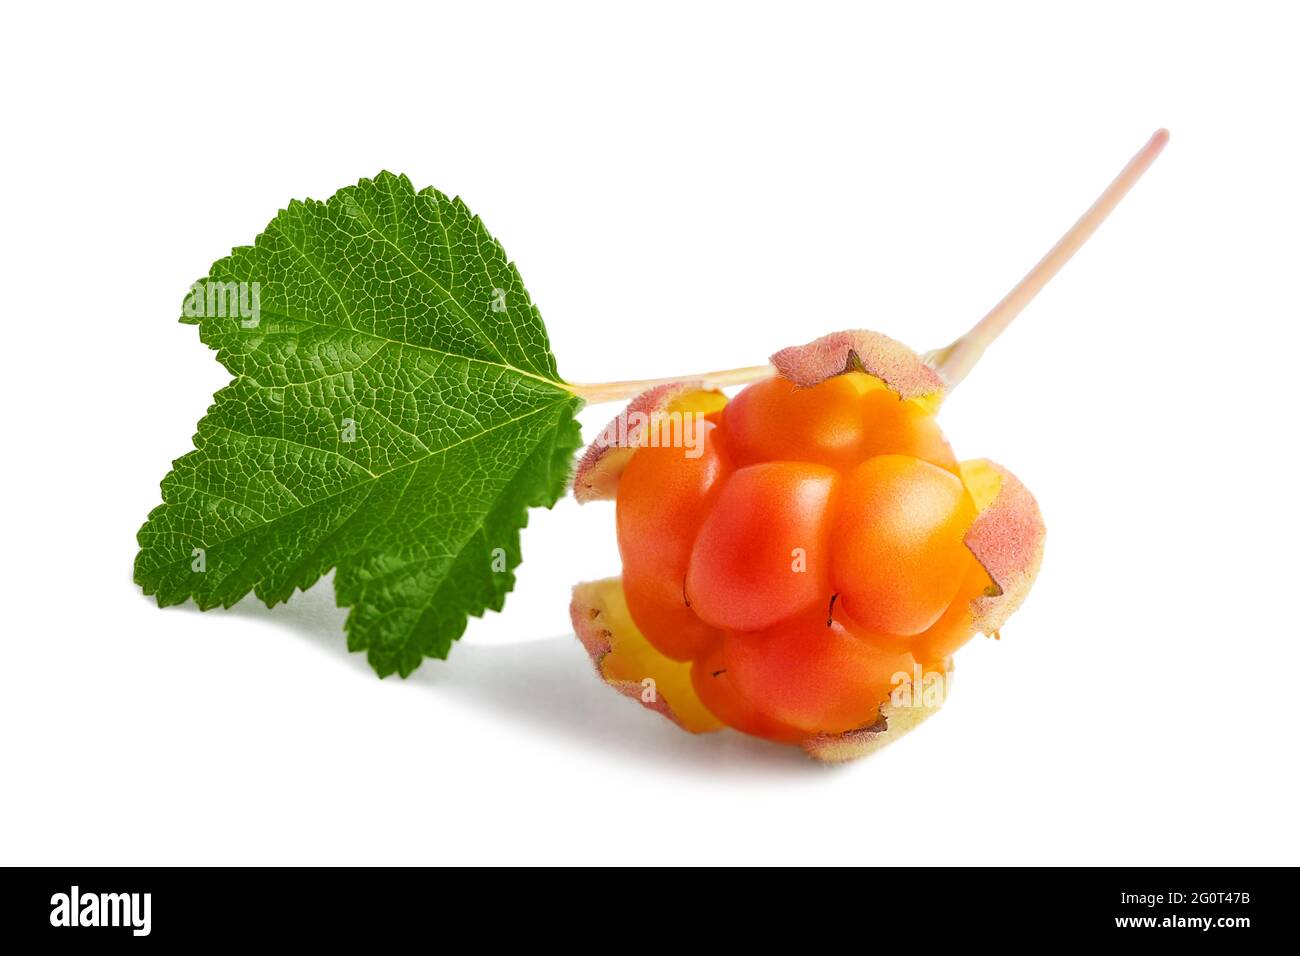 Cloudberry on a twig with a leaf isolated on white background Stock Photo